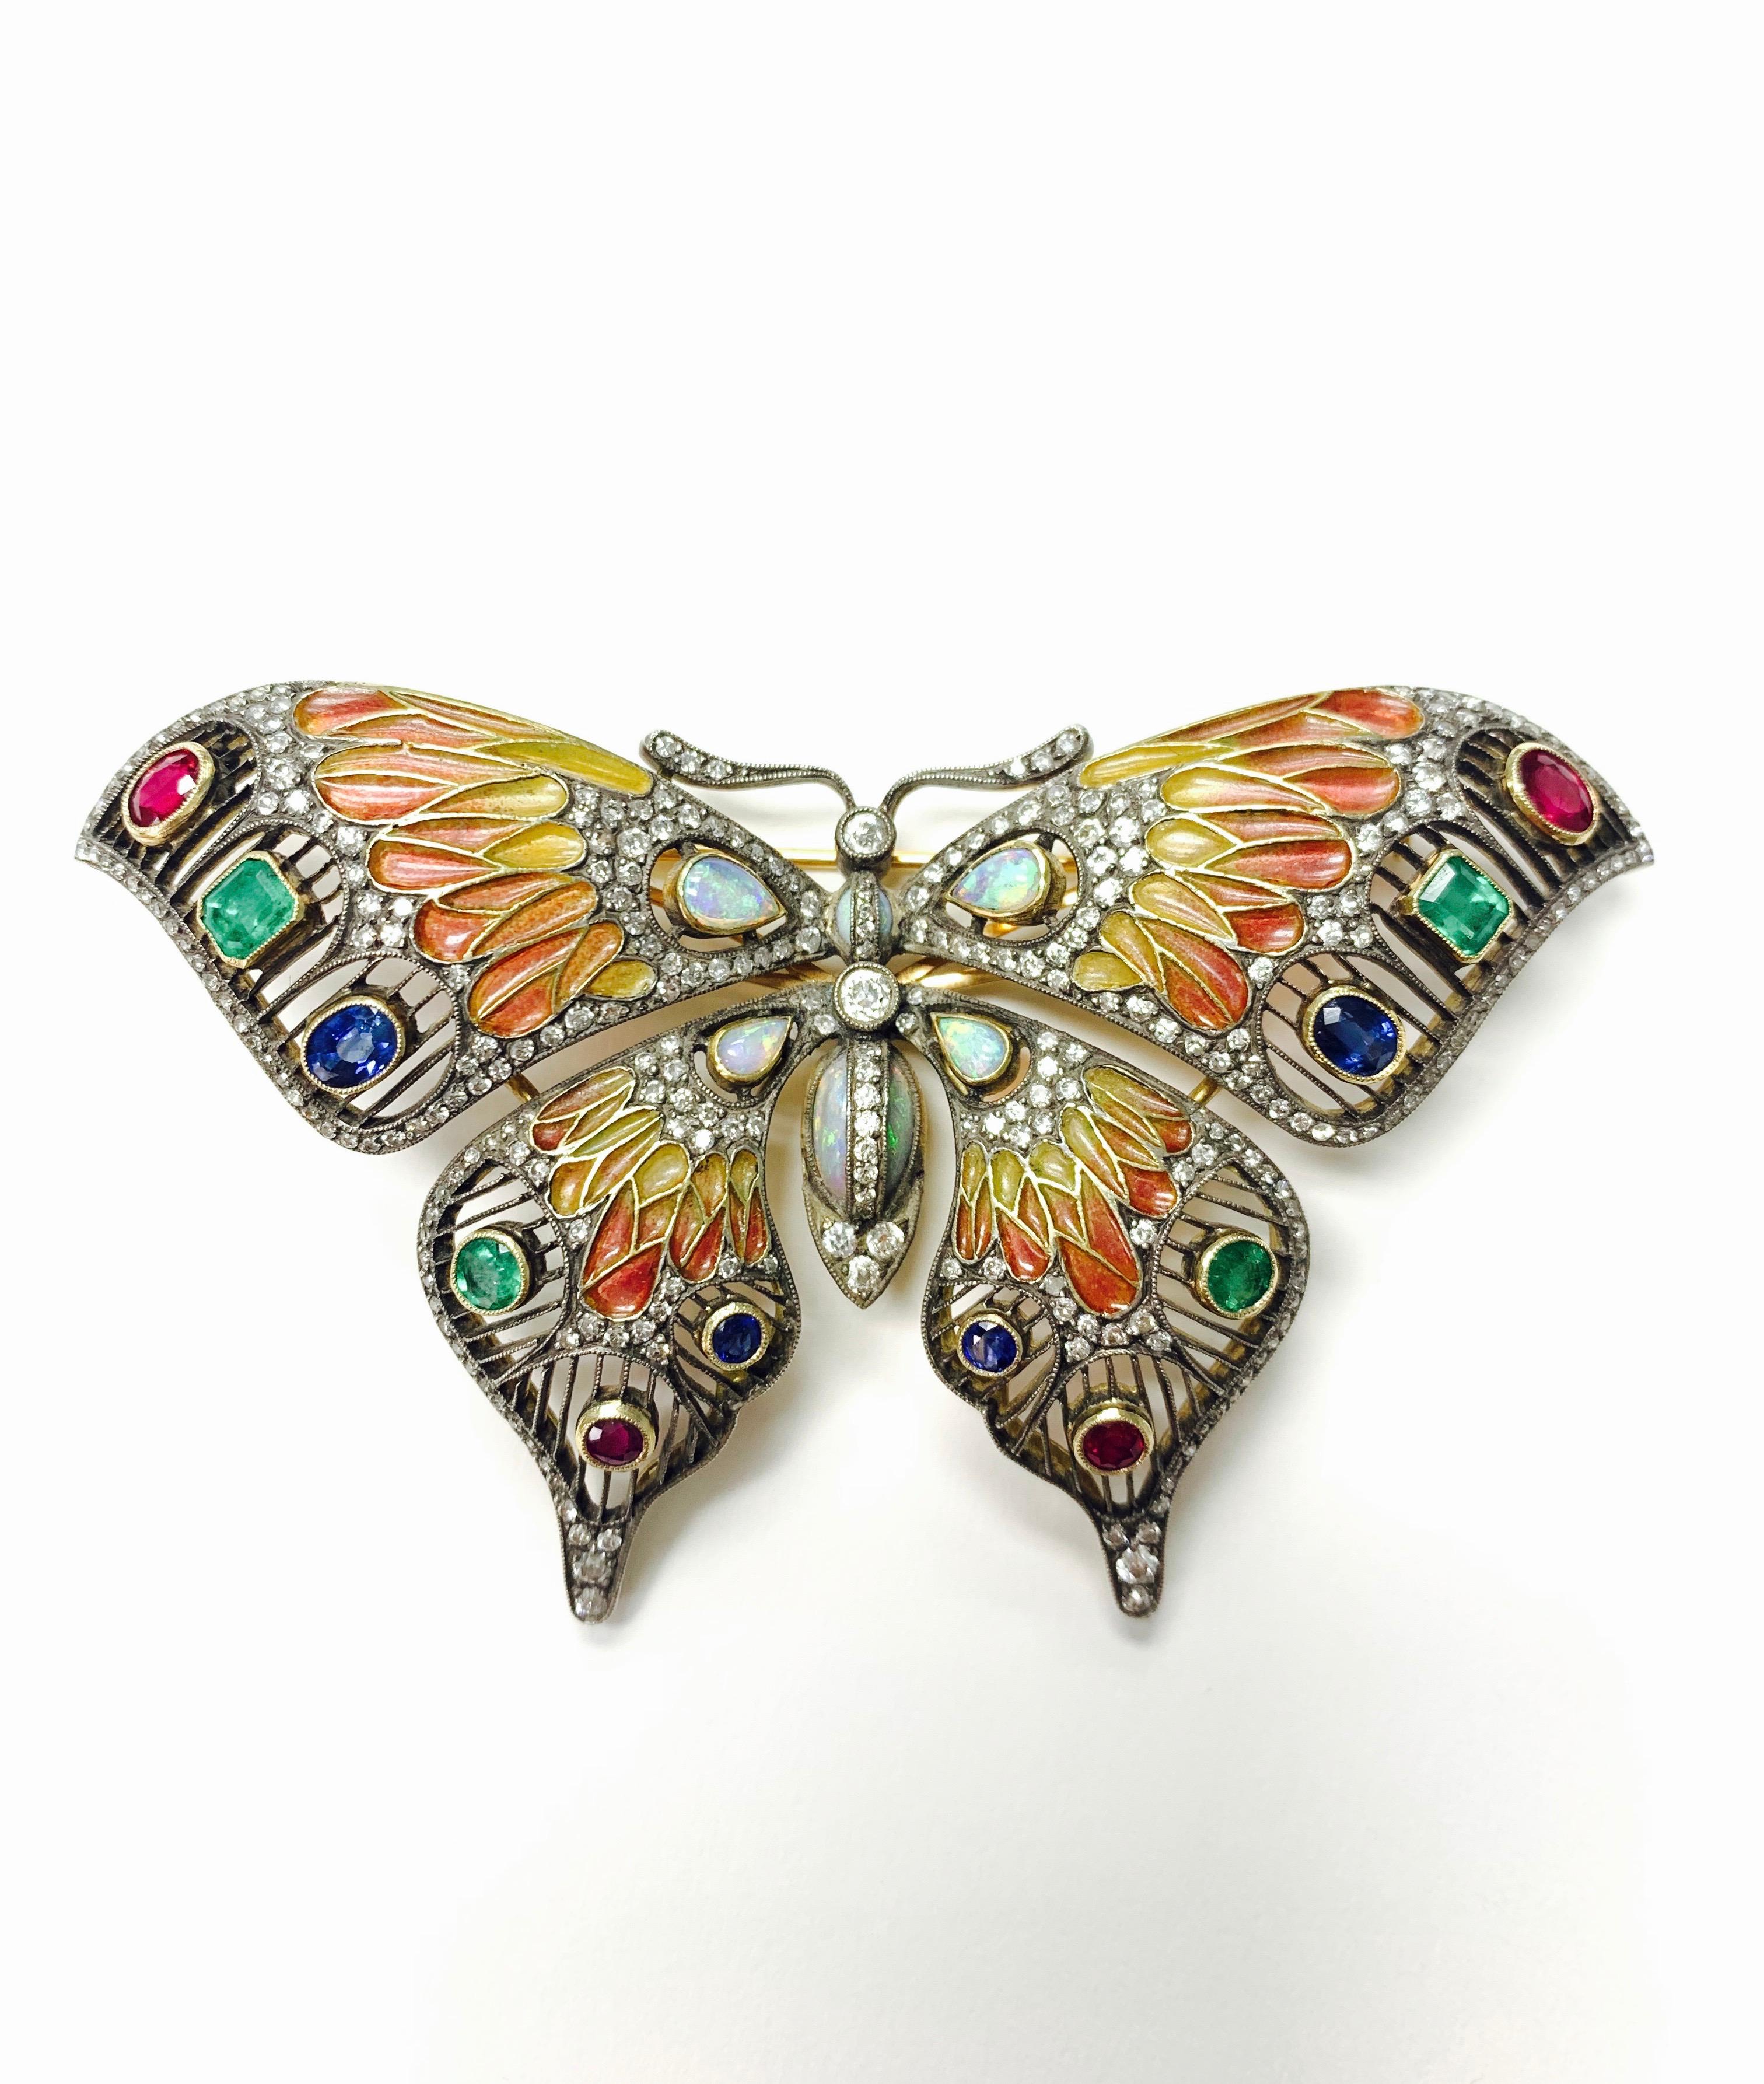 Oval Cut Diamond, Opal, Emerald, Blue Sapphire and Rubies Butterfly Brooch For Sale